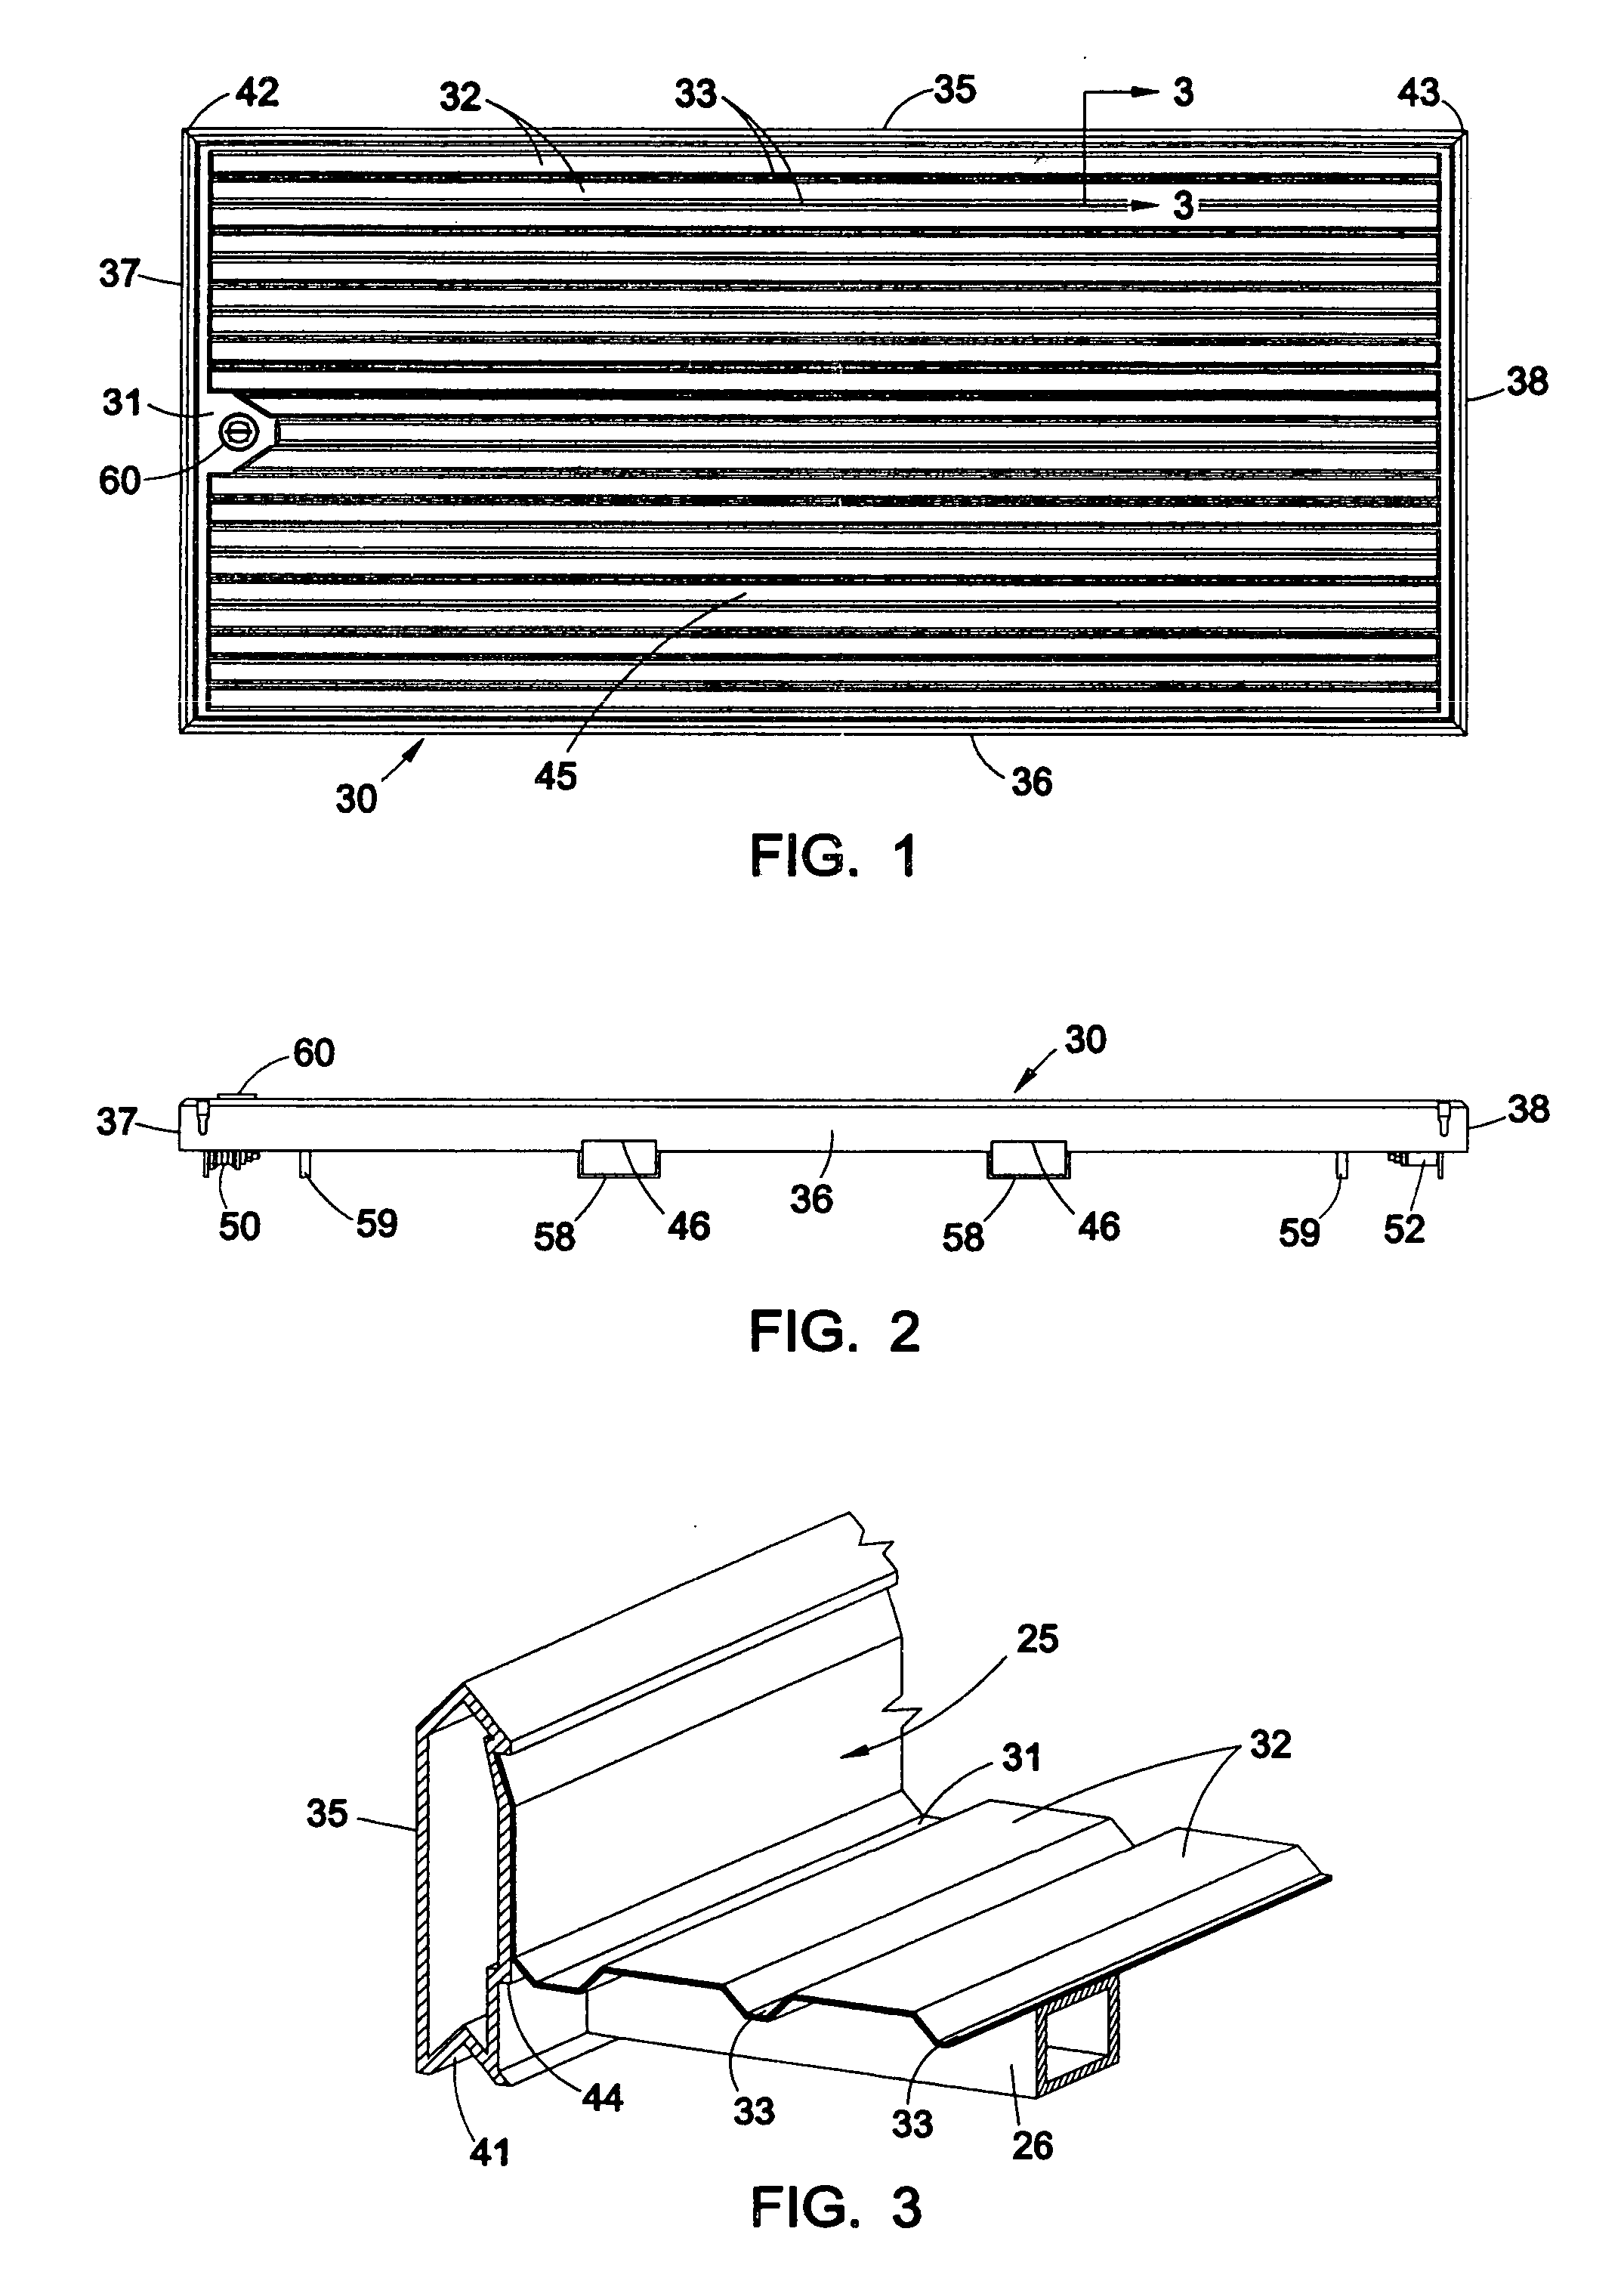 Apparatus and methods for handling and controlling the nurturing of plants